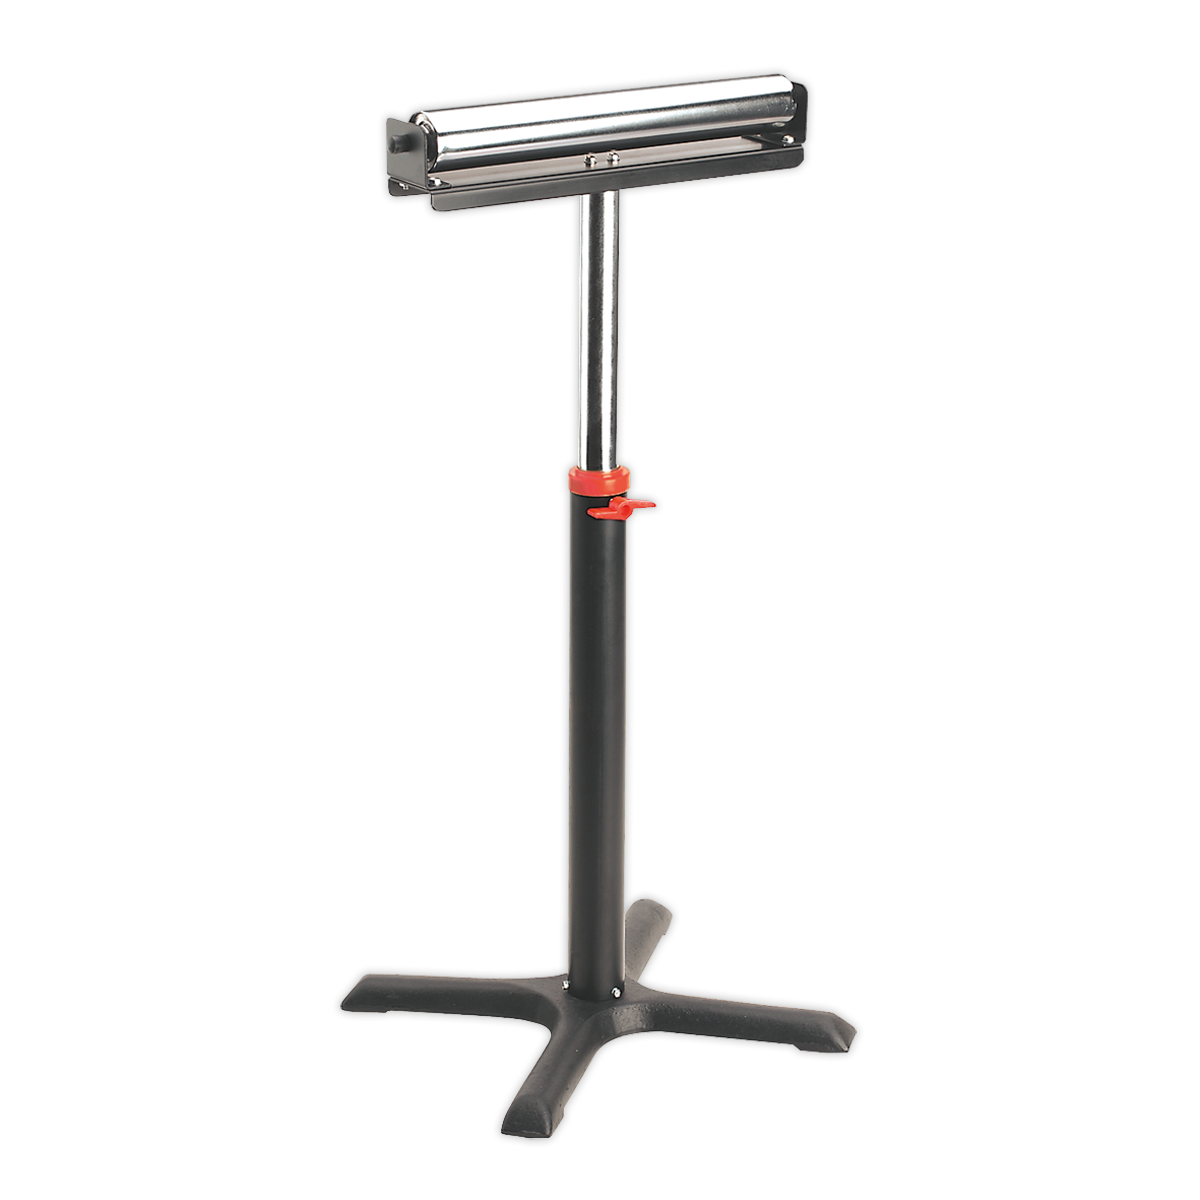 Sealey Roller Stand Woodworking Single Roller 90kg Capacity